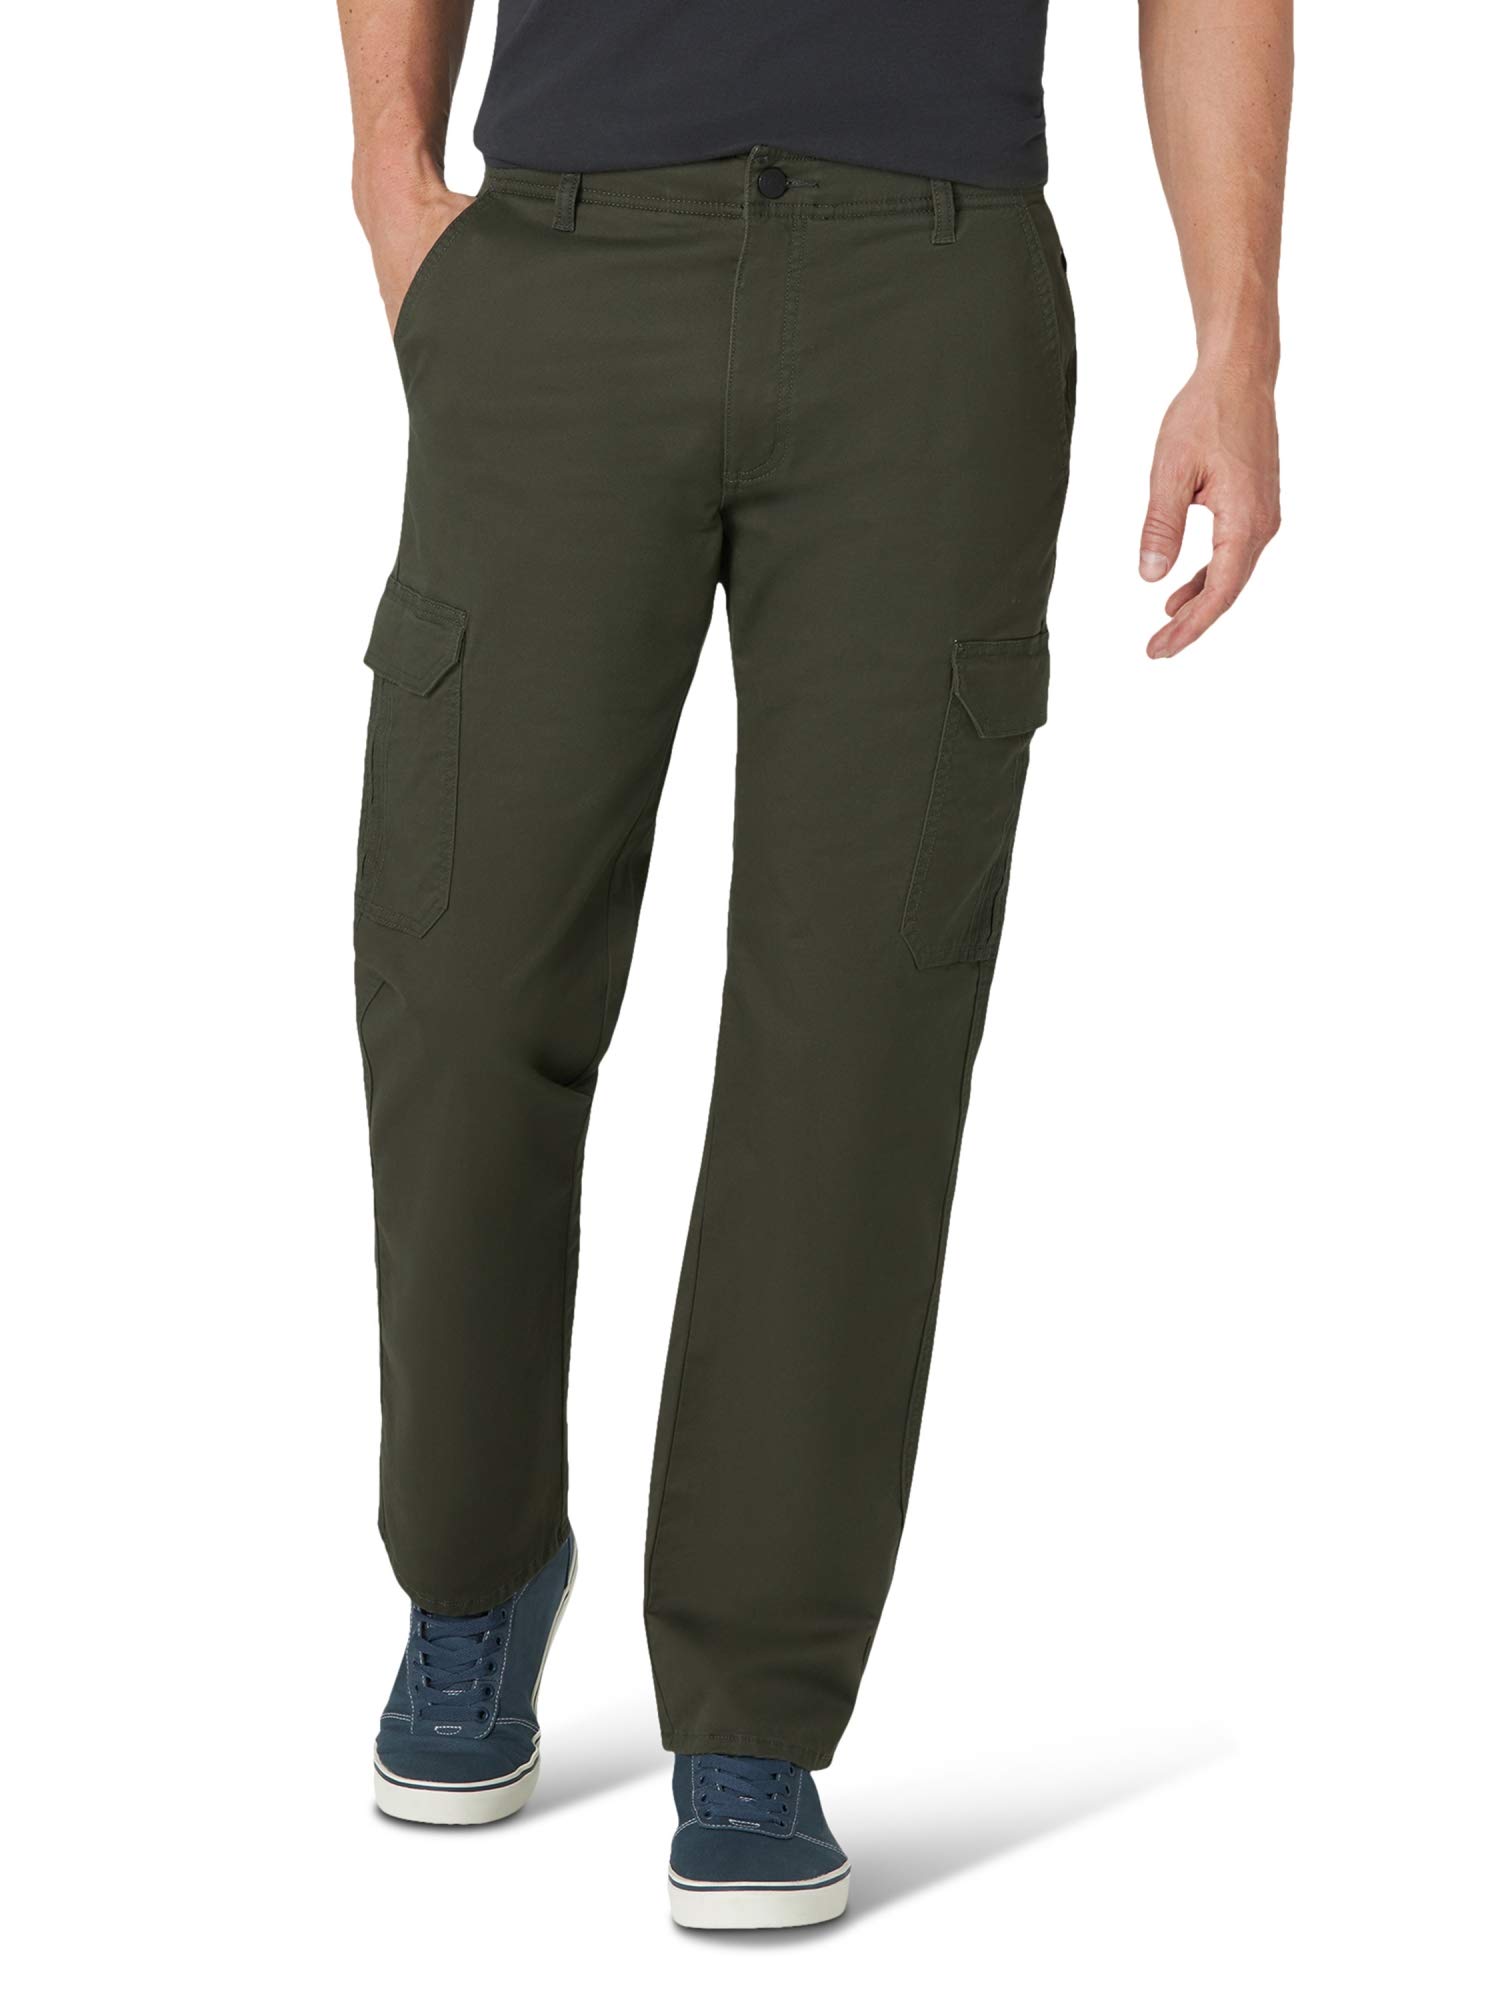 Lee Men's Extreme Motion Twill Cargo Pant (Frontier Olive or Tumbleweed, Various Sizes) $21.45 + Free Shipping w/ Prime or on $35+